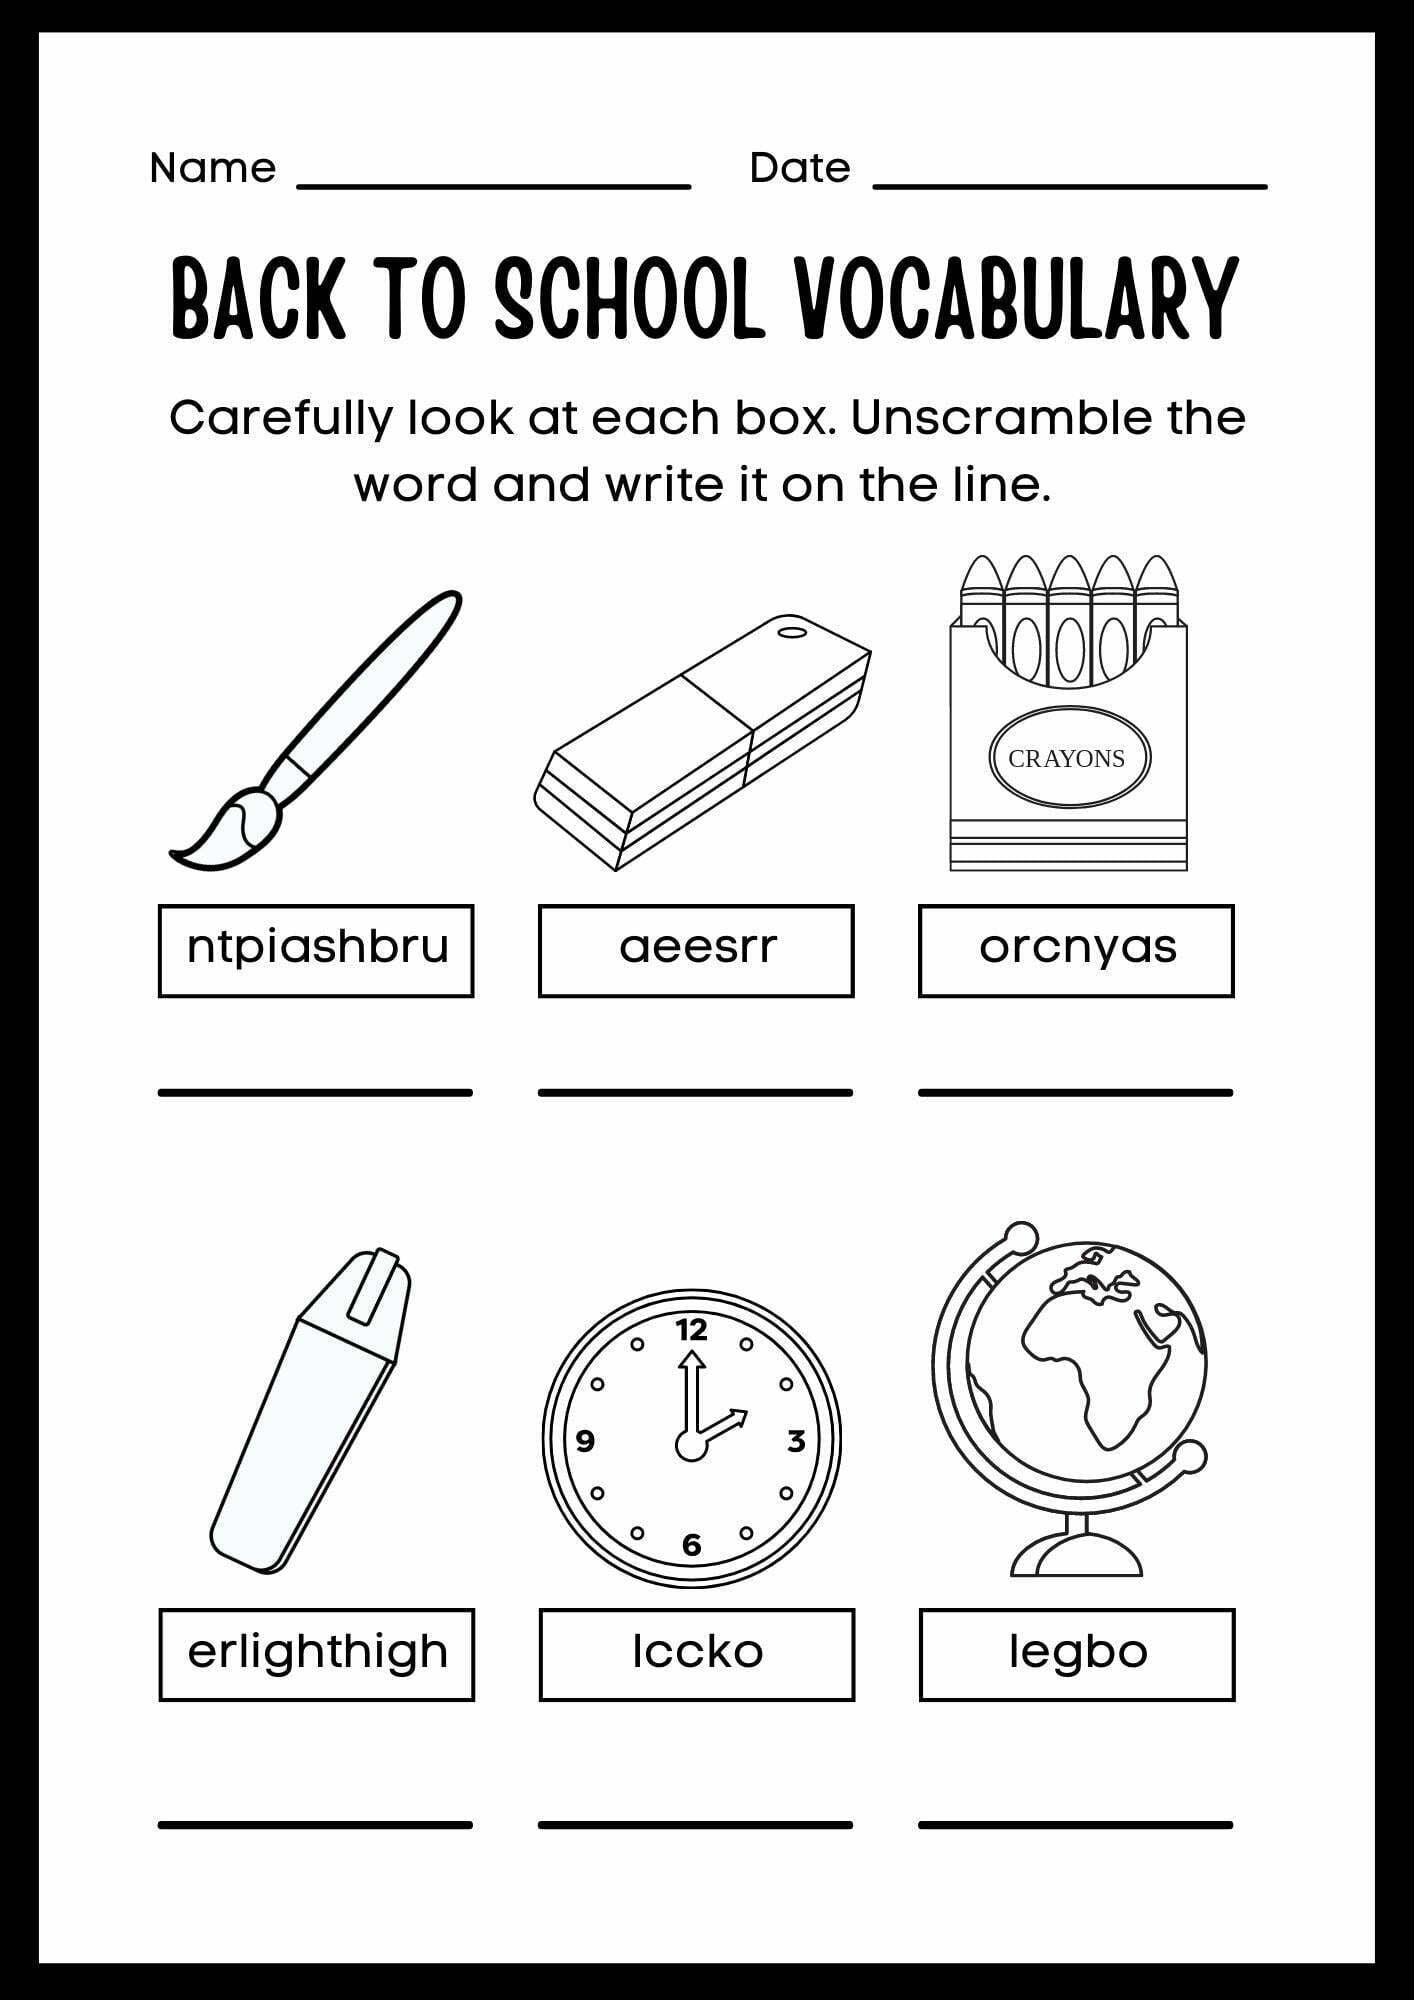 Back to School Activity Vocabulary Worksheet for Kids